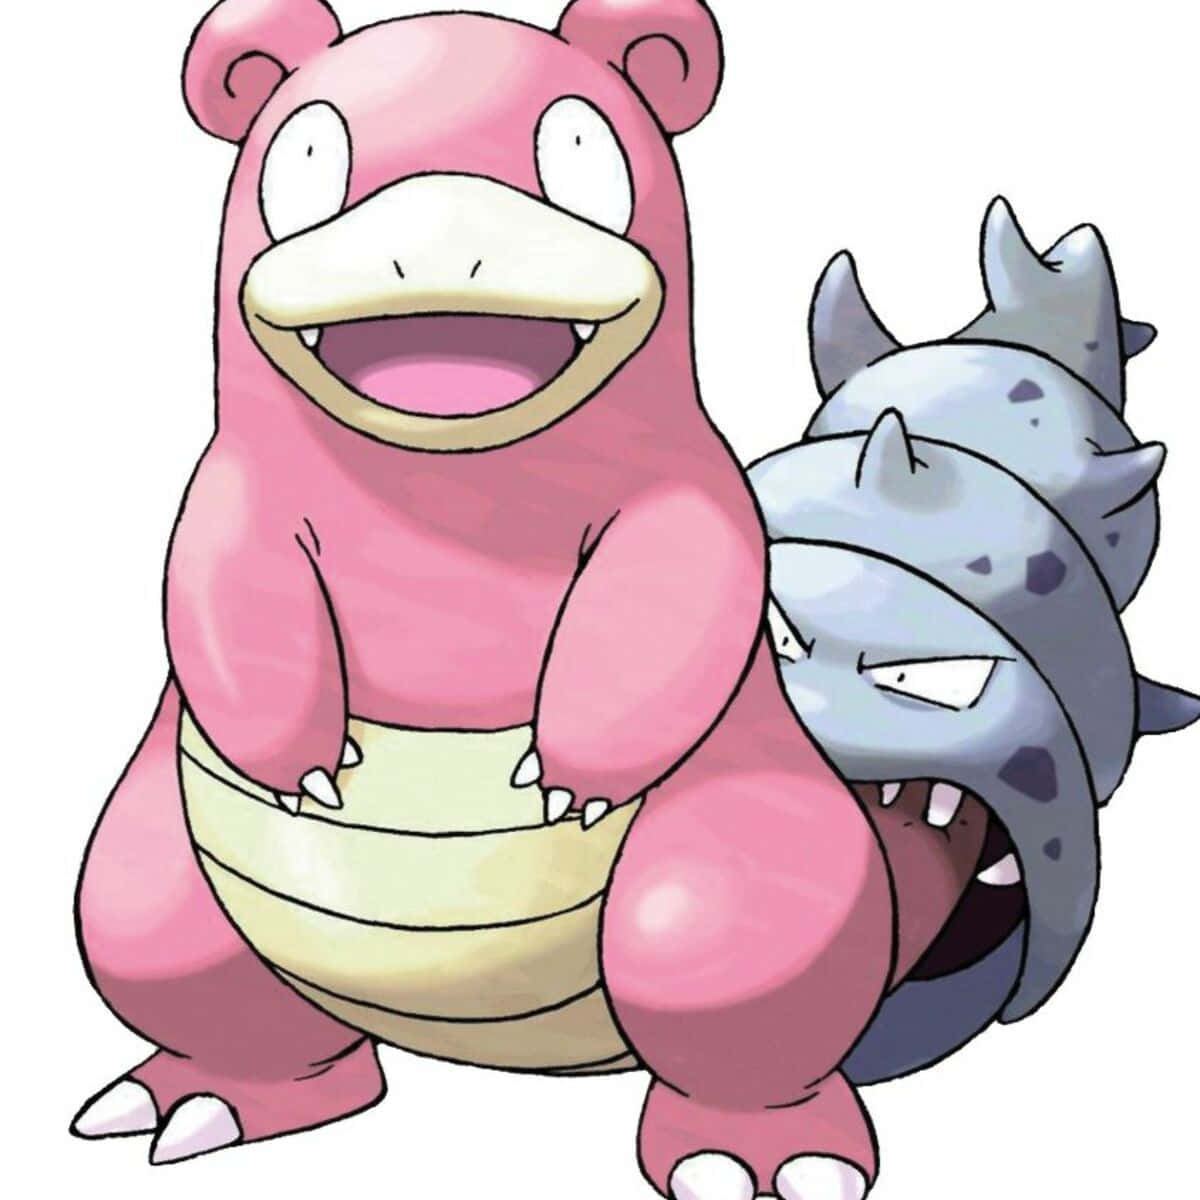 Silly Slowbro Wallpaper